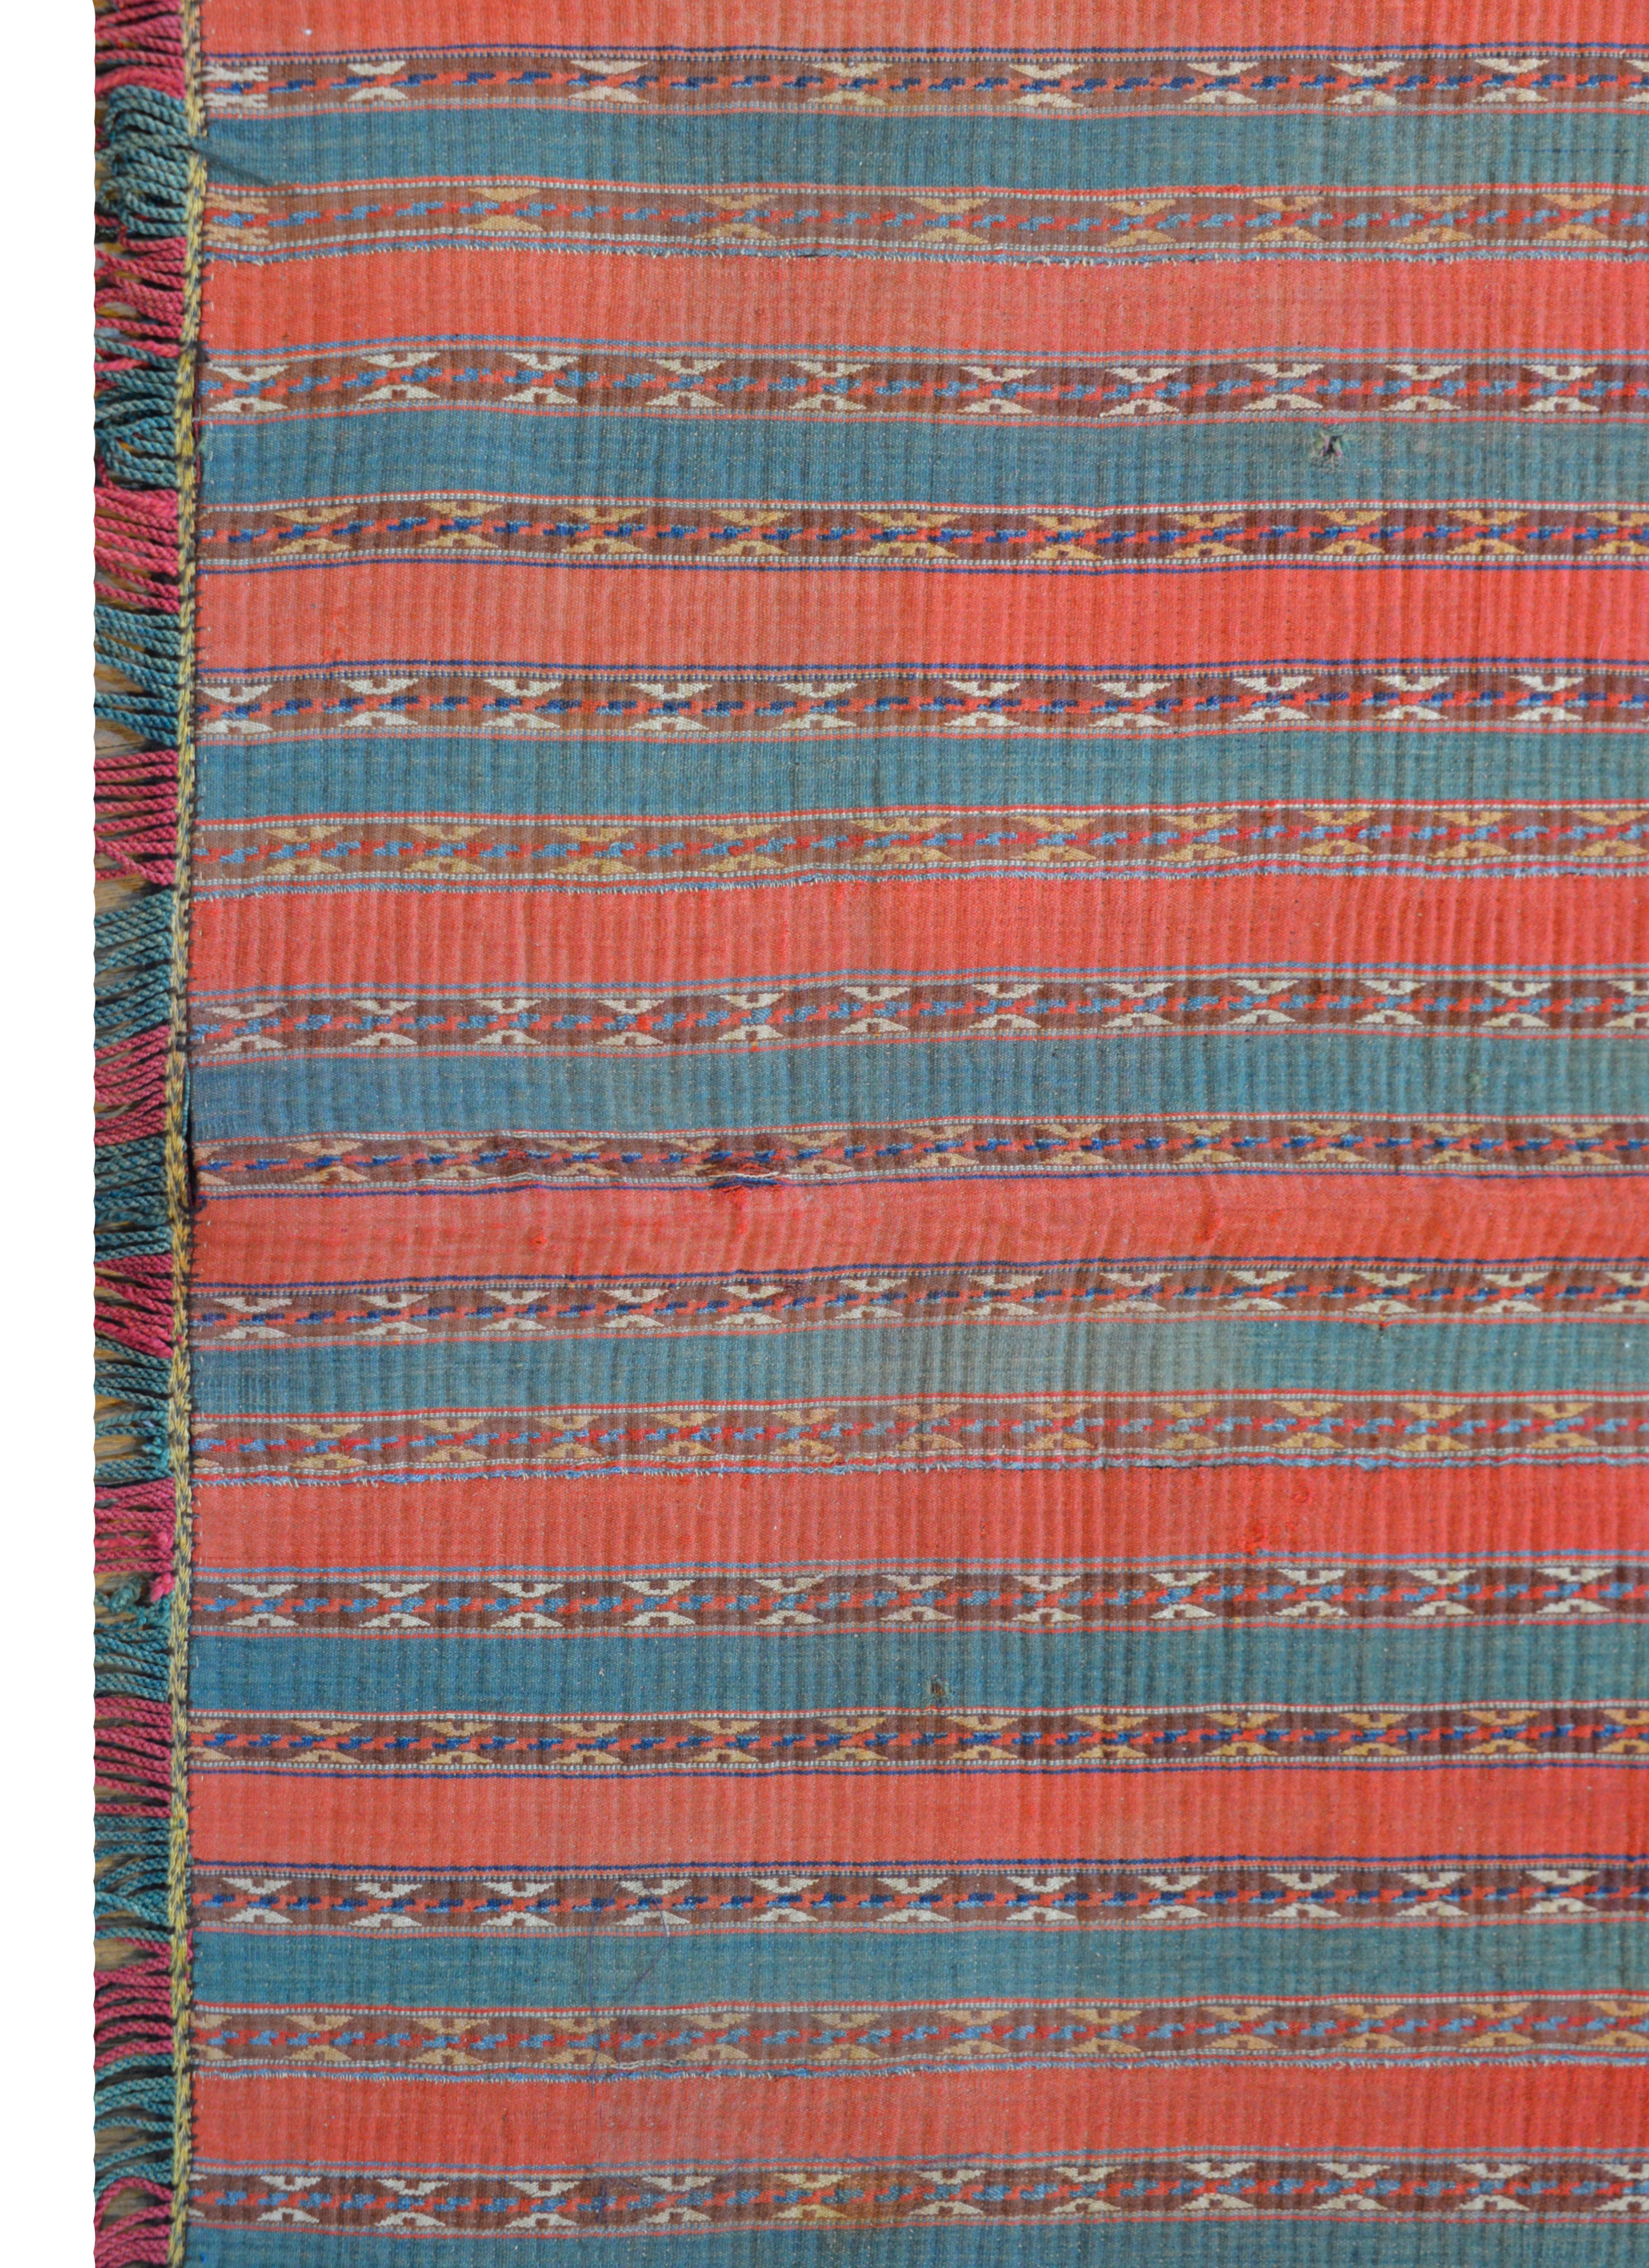 Vegetable Dyed Incredible Early 20th Century Shahsevan Horse Blanket For Sale